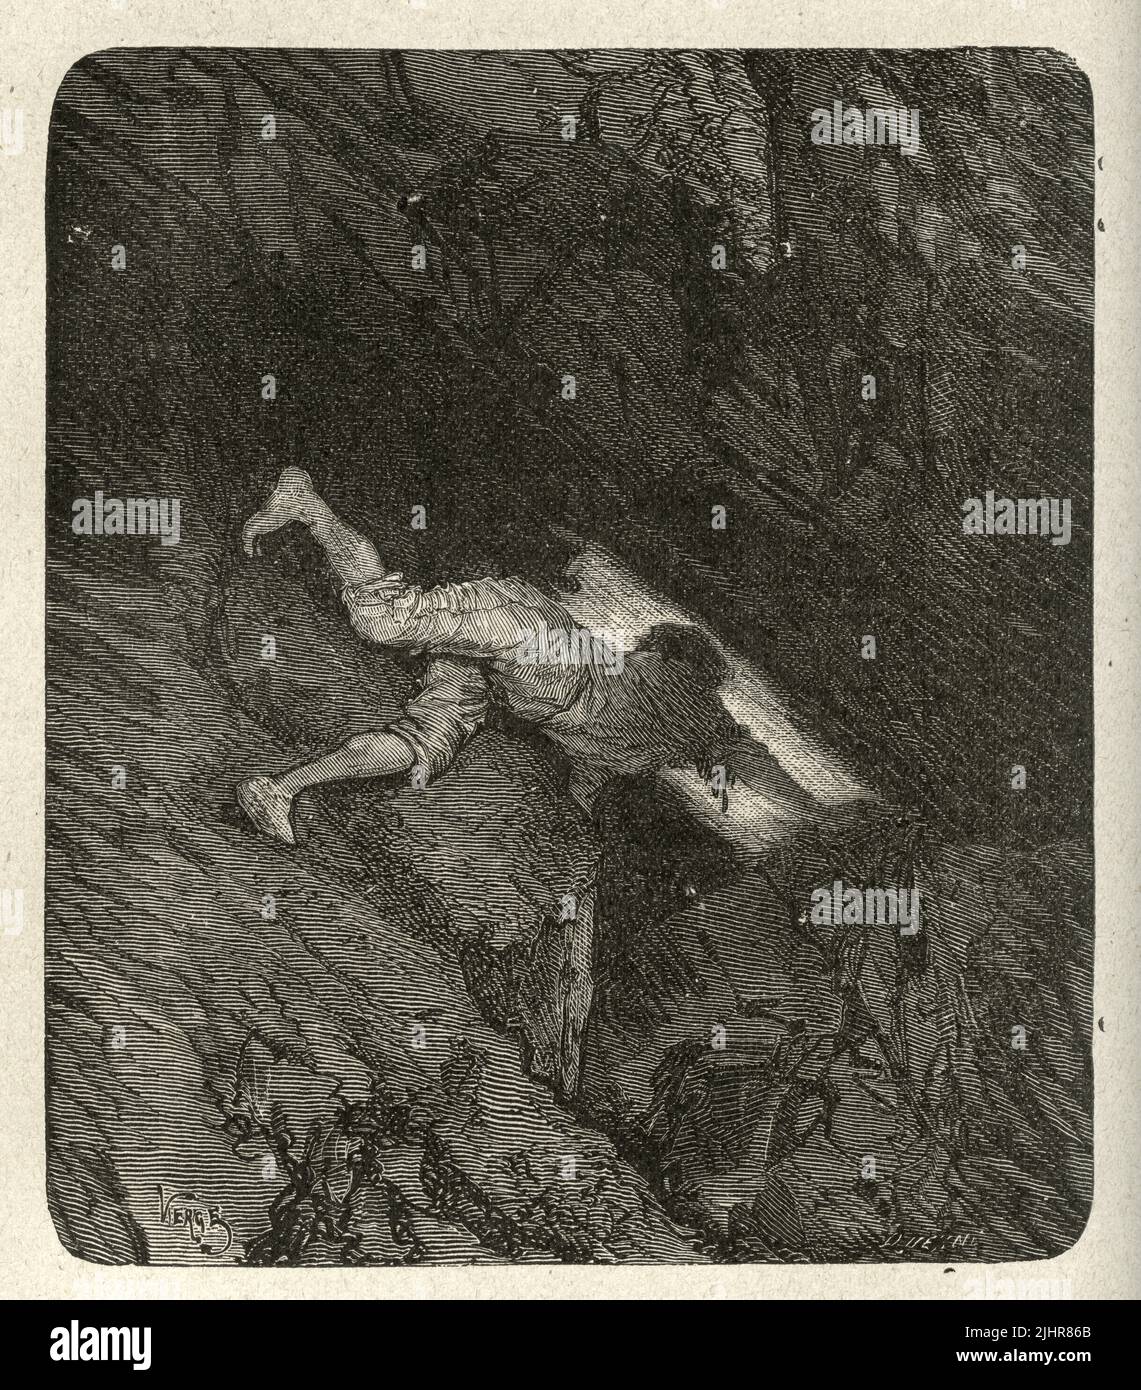 Discovery: 'The fissure was narrow, and the passage dofficult. Gilliatt could see daylight beyond. He made an effort, contorted himself as much as he could, and penetrated in to the cave as far as he was able.' Second part, Book I, chapter XI.  Illustrator: Daniel Vierge. Engraver: Désiré Quesnel. Illustration from a set of nearly 150 woodcuts published in the Volume XI of Victor Hugo's 'Oeuvres Complètes' including 'Les Travailleurs de la Mer' ('Toilers of the Sea') - written in 1866. Book published in 1906 by the Société d'éditions Littéraires et Artistiques, Librairie Paul Ollendorff. Stock Photo